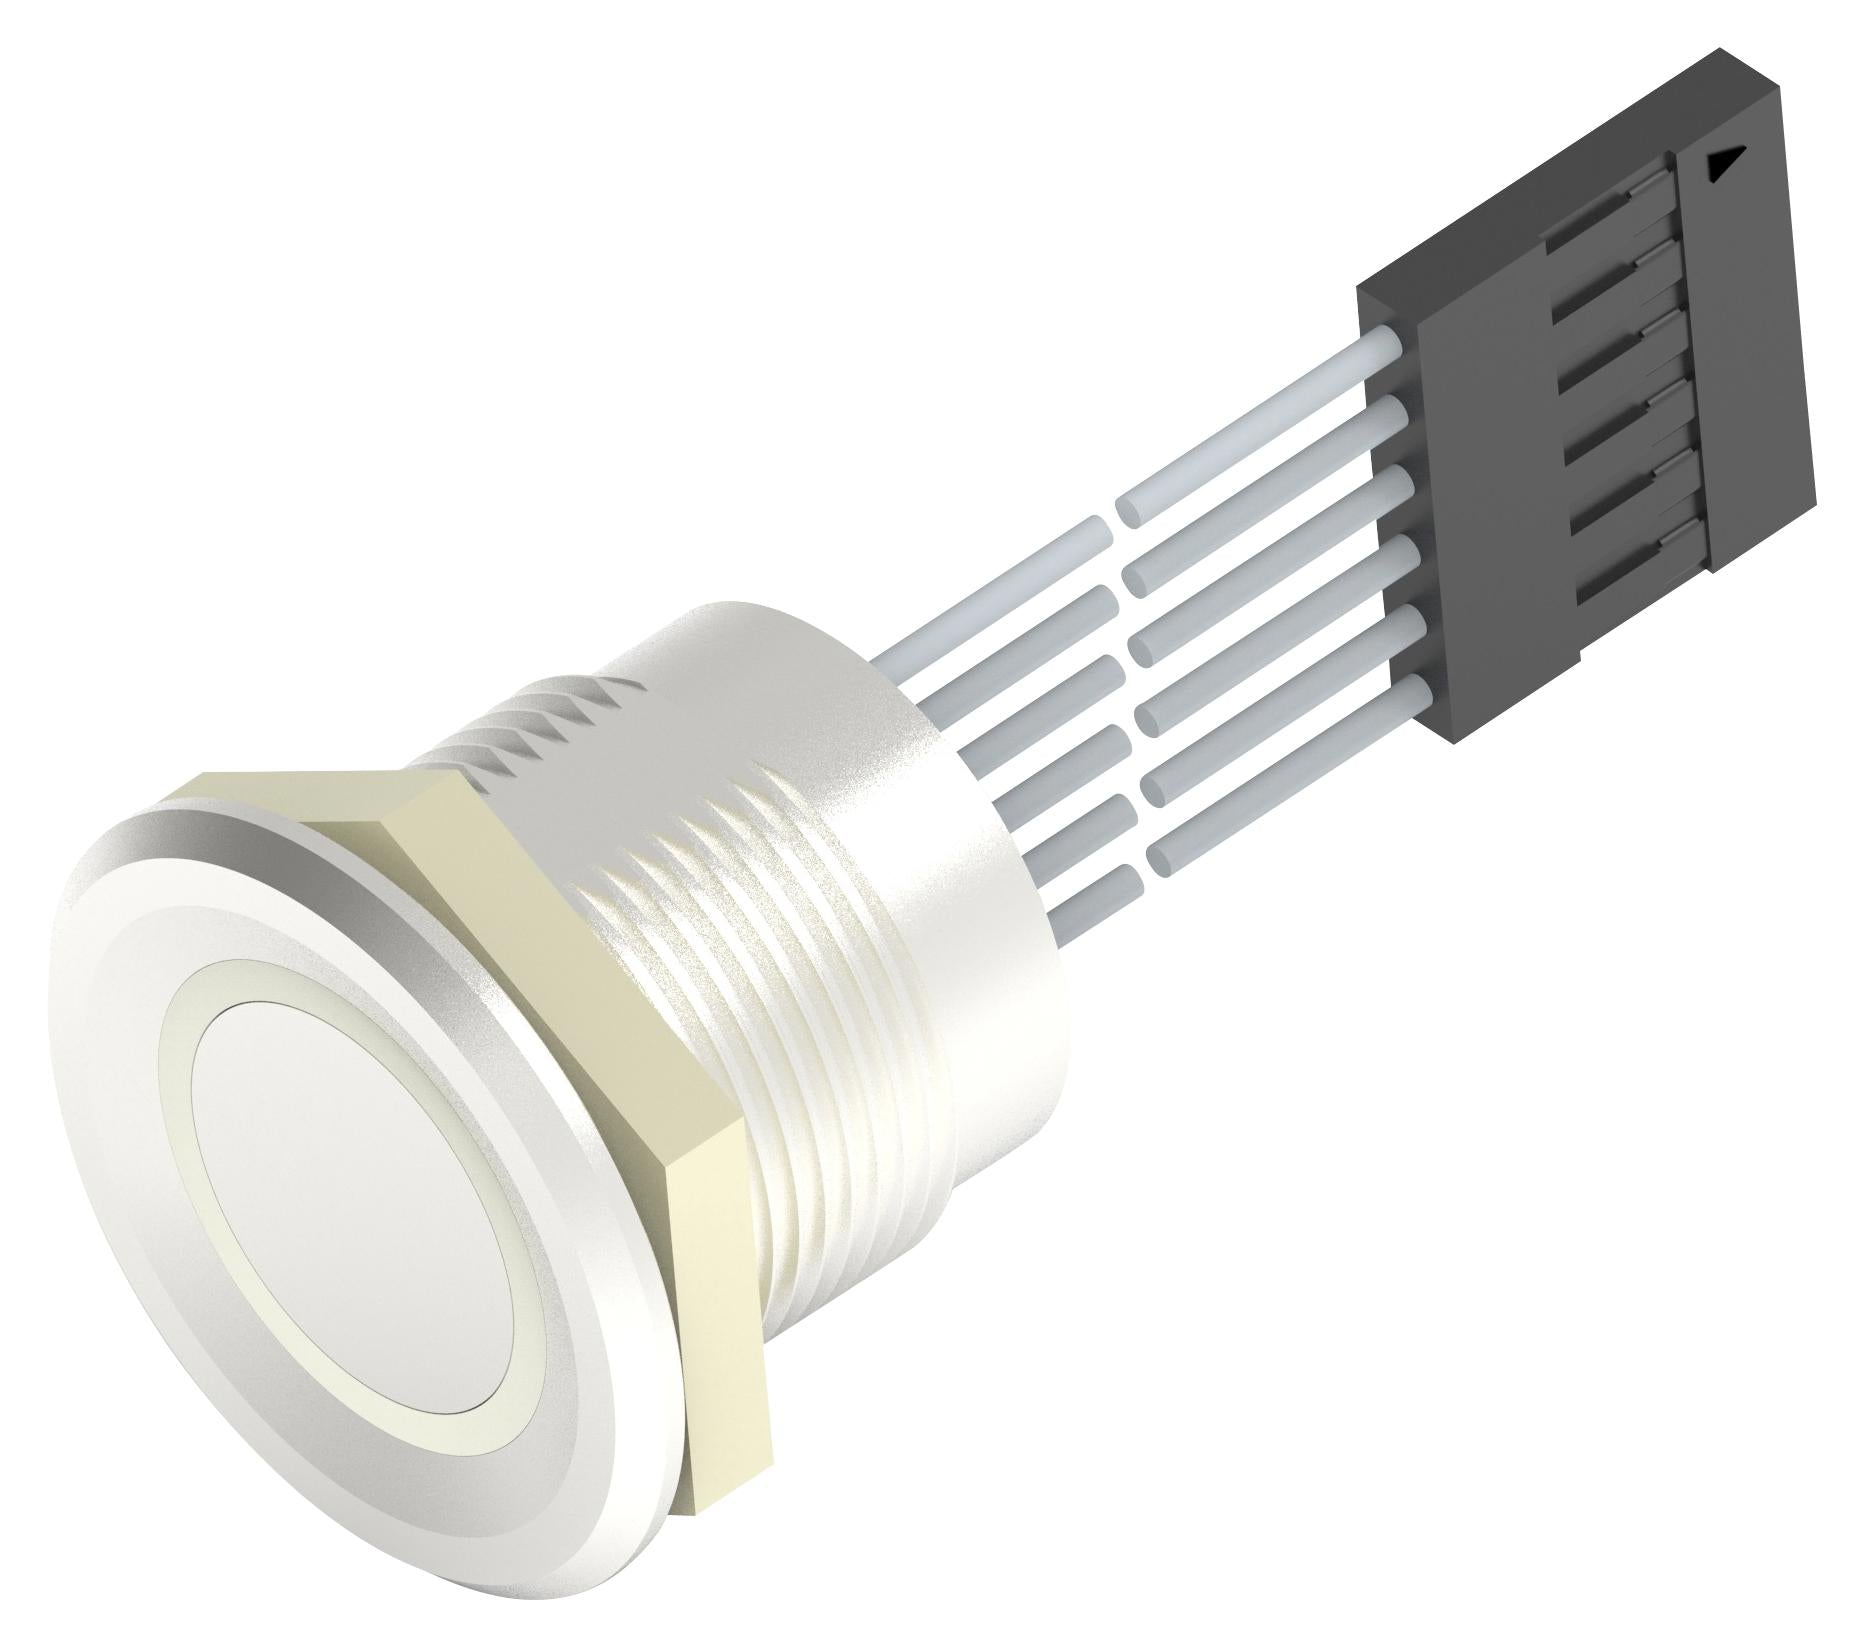 AVP19MAIOCE0DT5A04 VANDAL RESISTANT SW, SPST, 1A, 24V, PANL ALCOSWITCH - TE CONNECTIVITY